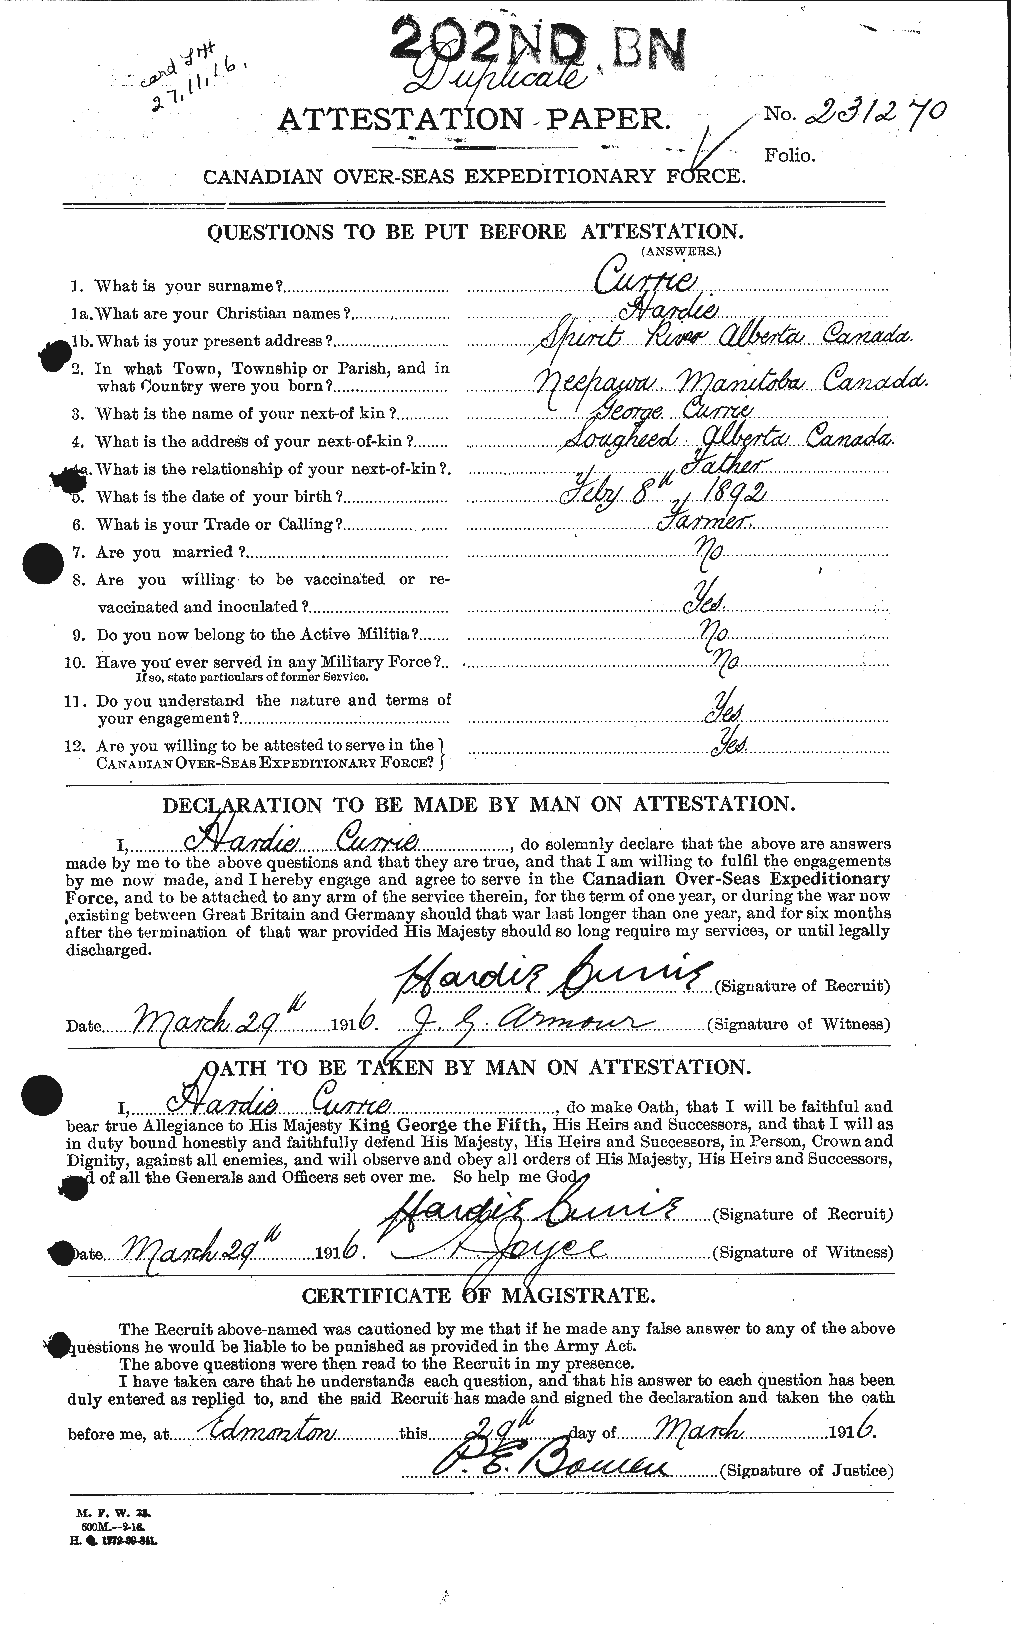 Personnel Records of the First World War - CEF 072924a